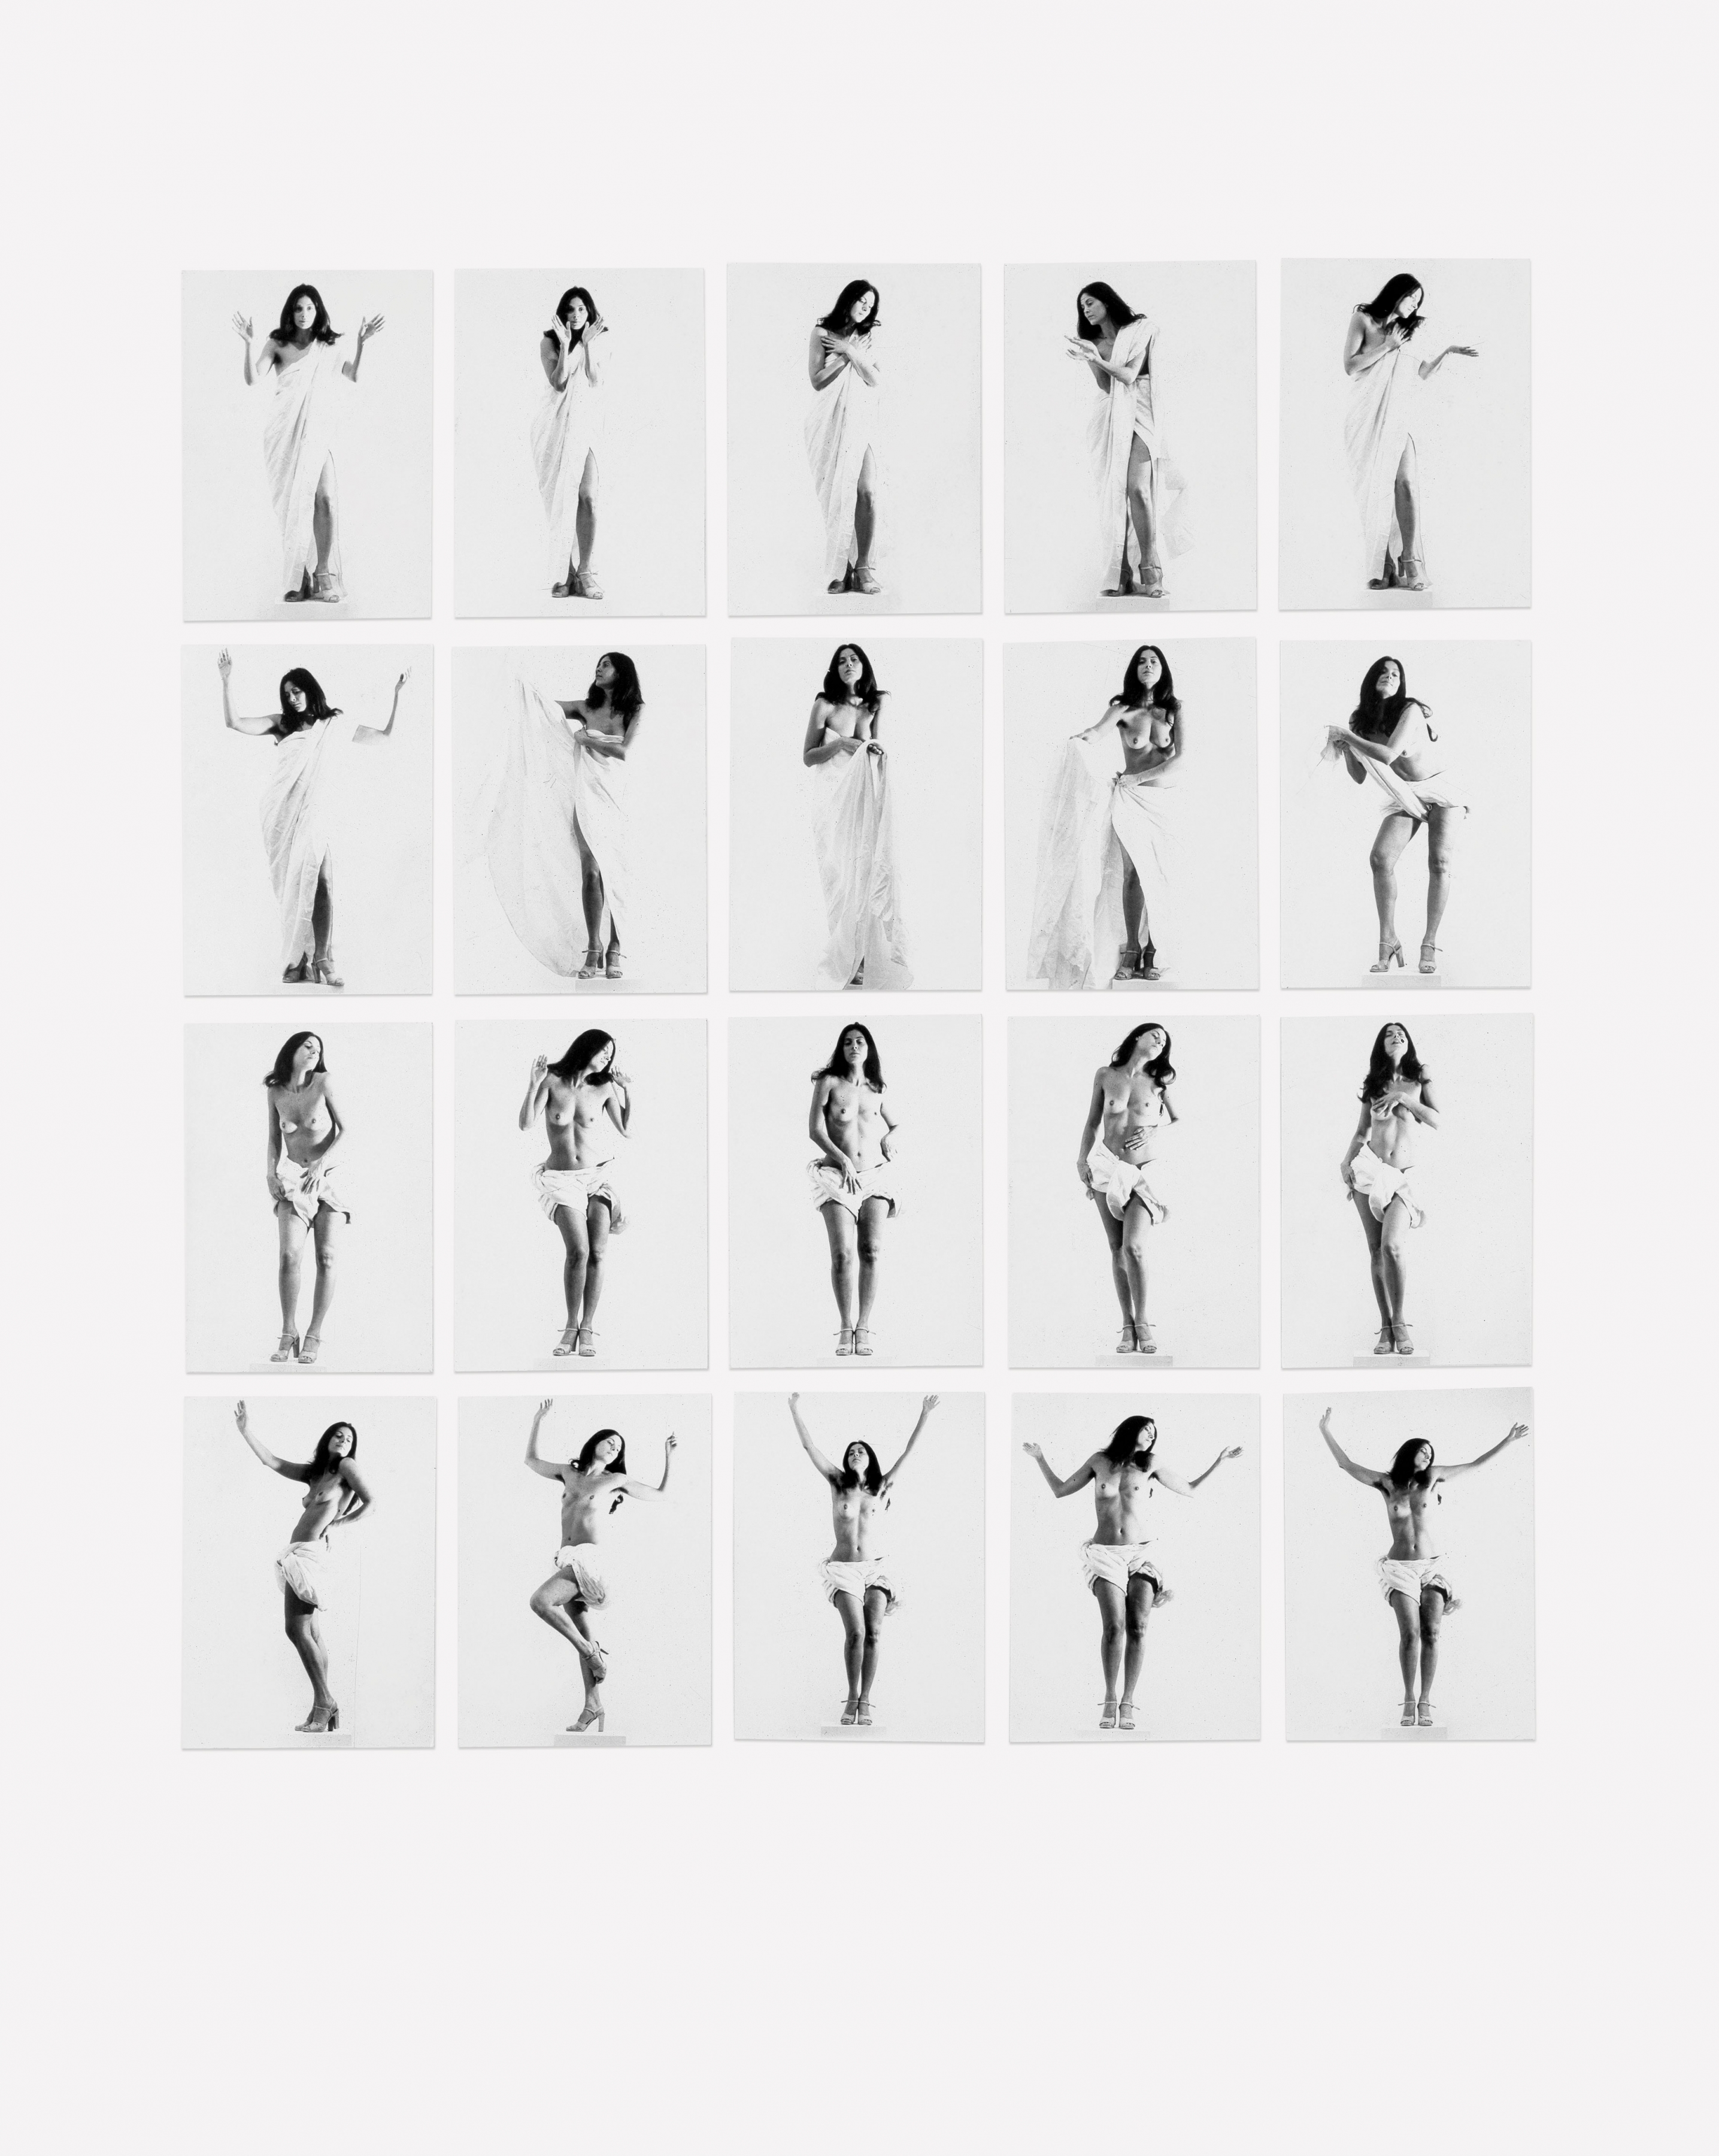 Hannah Wilke
Super-t-Art, 1974
Twenty black and white photographs from a three-minute
performance at The Kitchen, New York, November 1974
40 1/2 &amp;times; 32 1/2 inches overall; each: 6 1/2 &amp;times; 4 1/2 inches
(16.5 &amp;times; 11.4 cm)
Hannah Wilke Collection &amp;amp; Archive, Los Angeles.
Courtesy Alison Jacques, London.